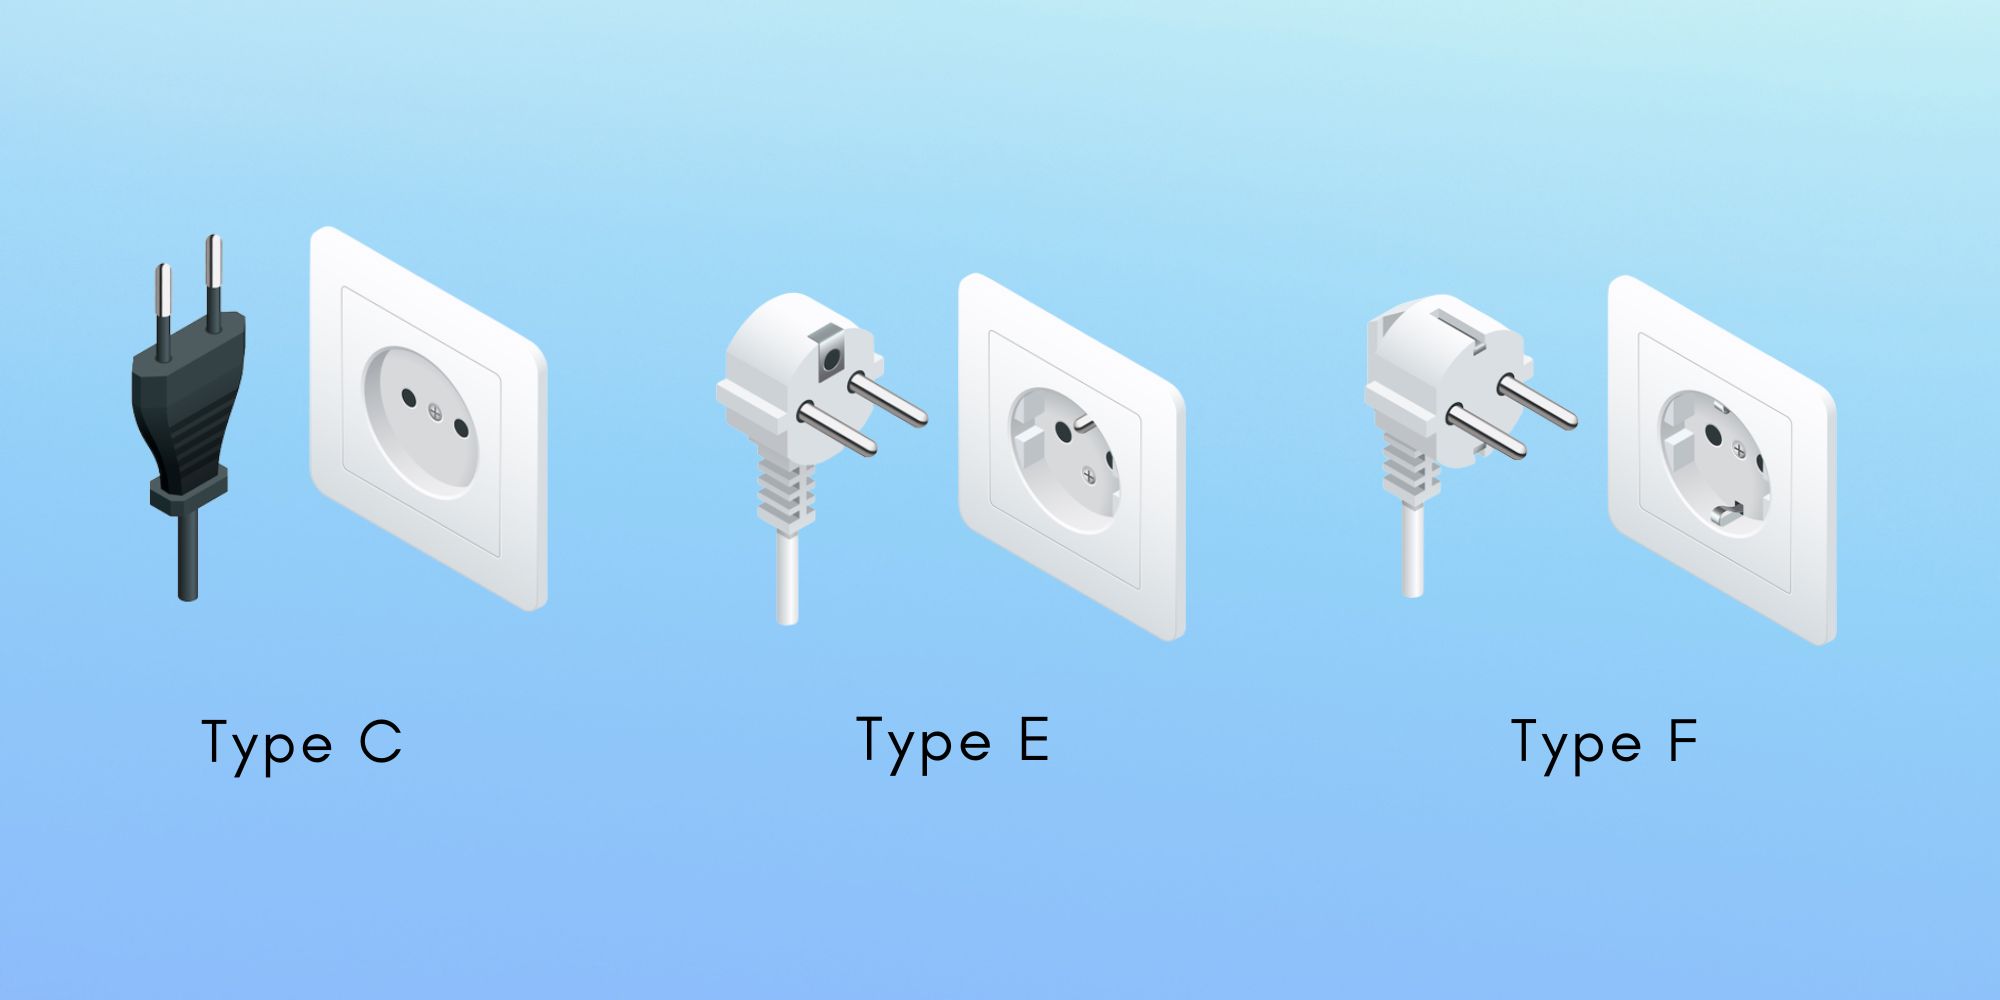 Guinea-Bissau Power Plugs and Sockets: Type C, Type E, and Type F
